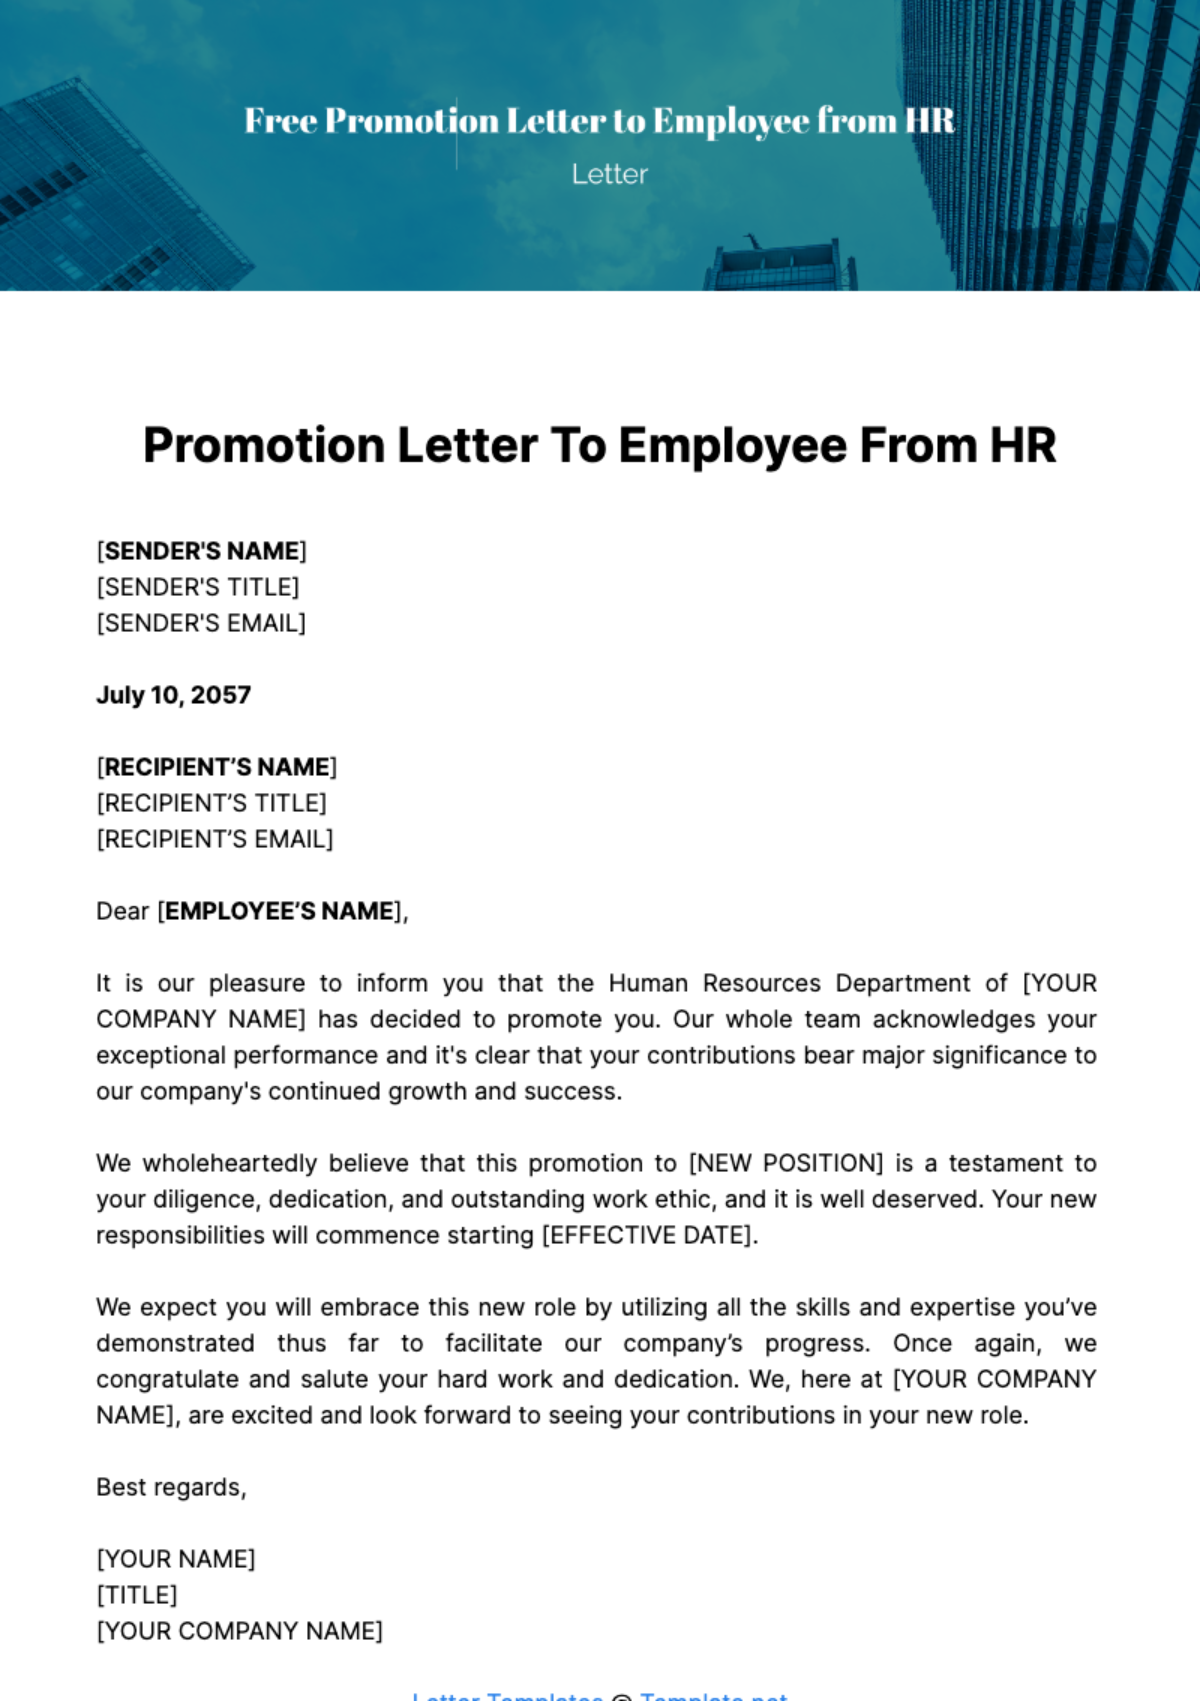 Promotion Letter to Employee from HR Template